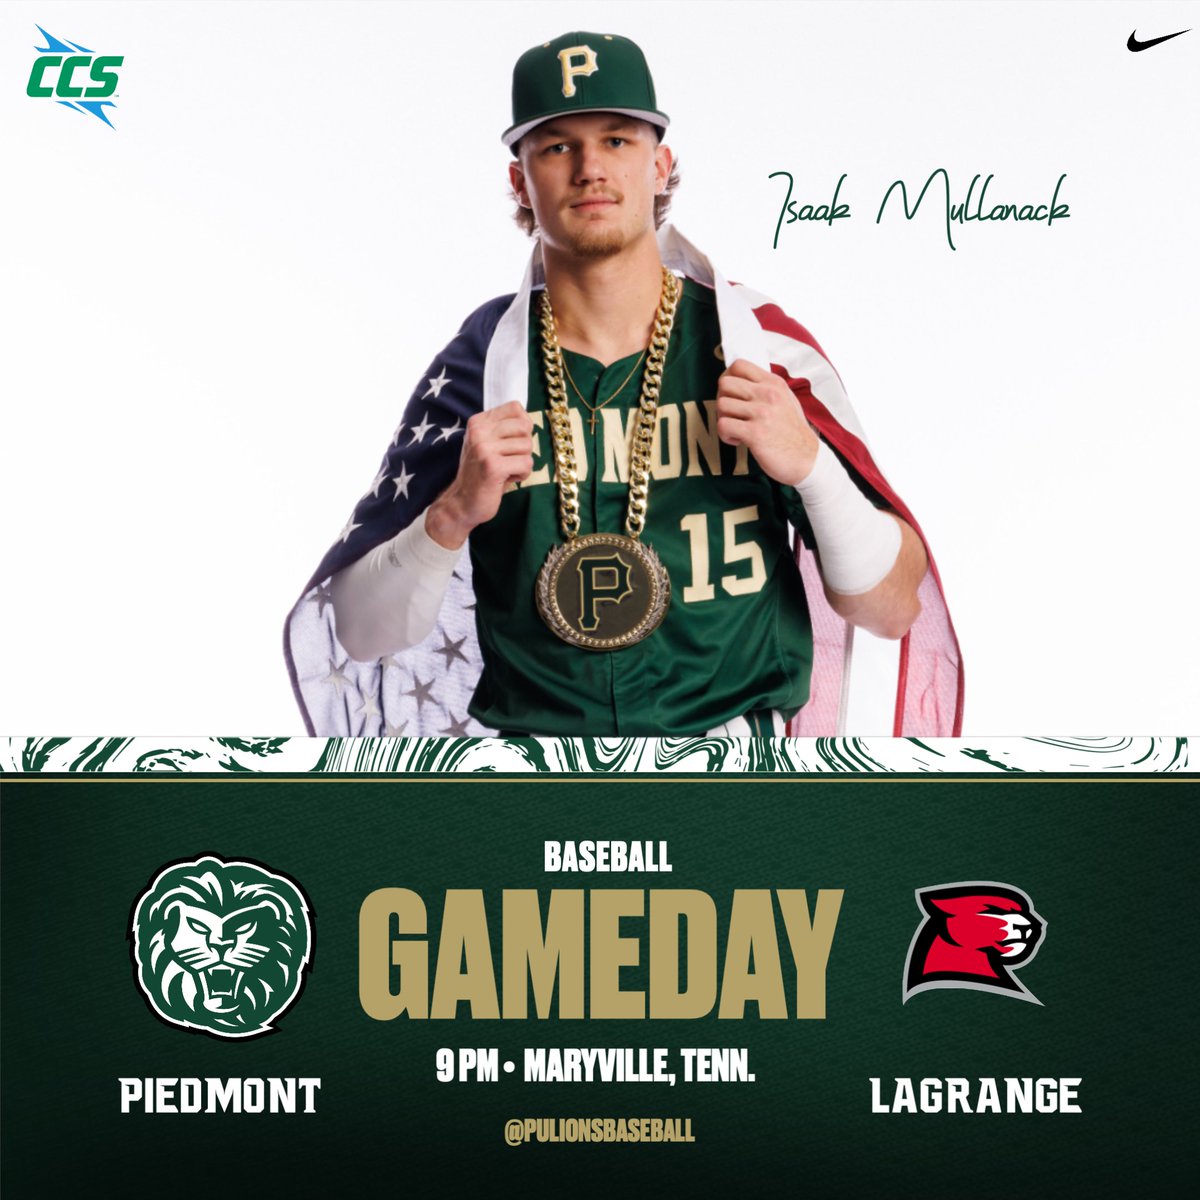 Day one of action at the CCS Tournament is underway and the Lions are in the final slot tonight! ⏰ 9 p.m. (approx.) 🆚 LaGrange 📍 Maryville, Tenn. 📊 bit.ly/3QEZO9t 📺 bit.ly/4bwMtby